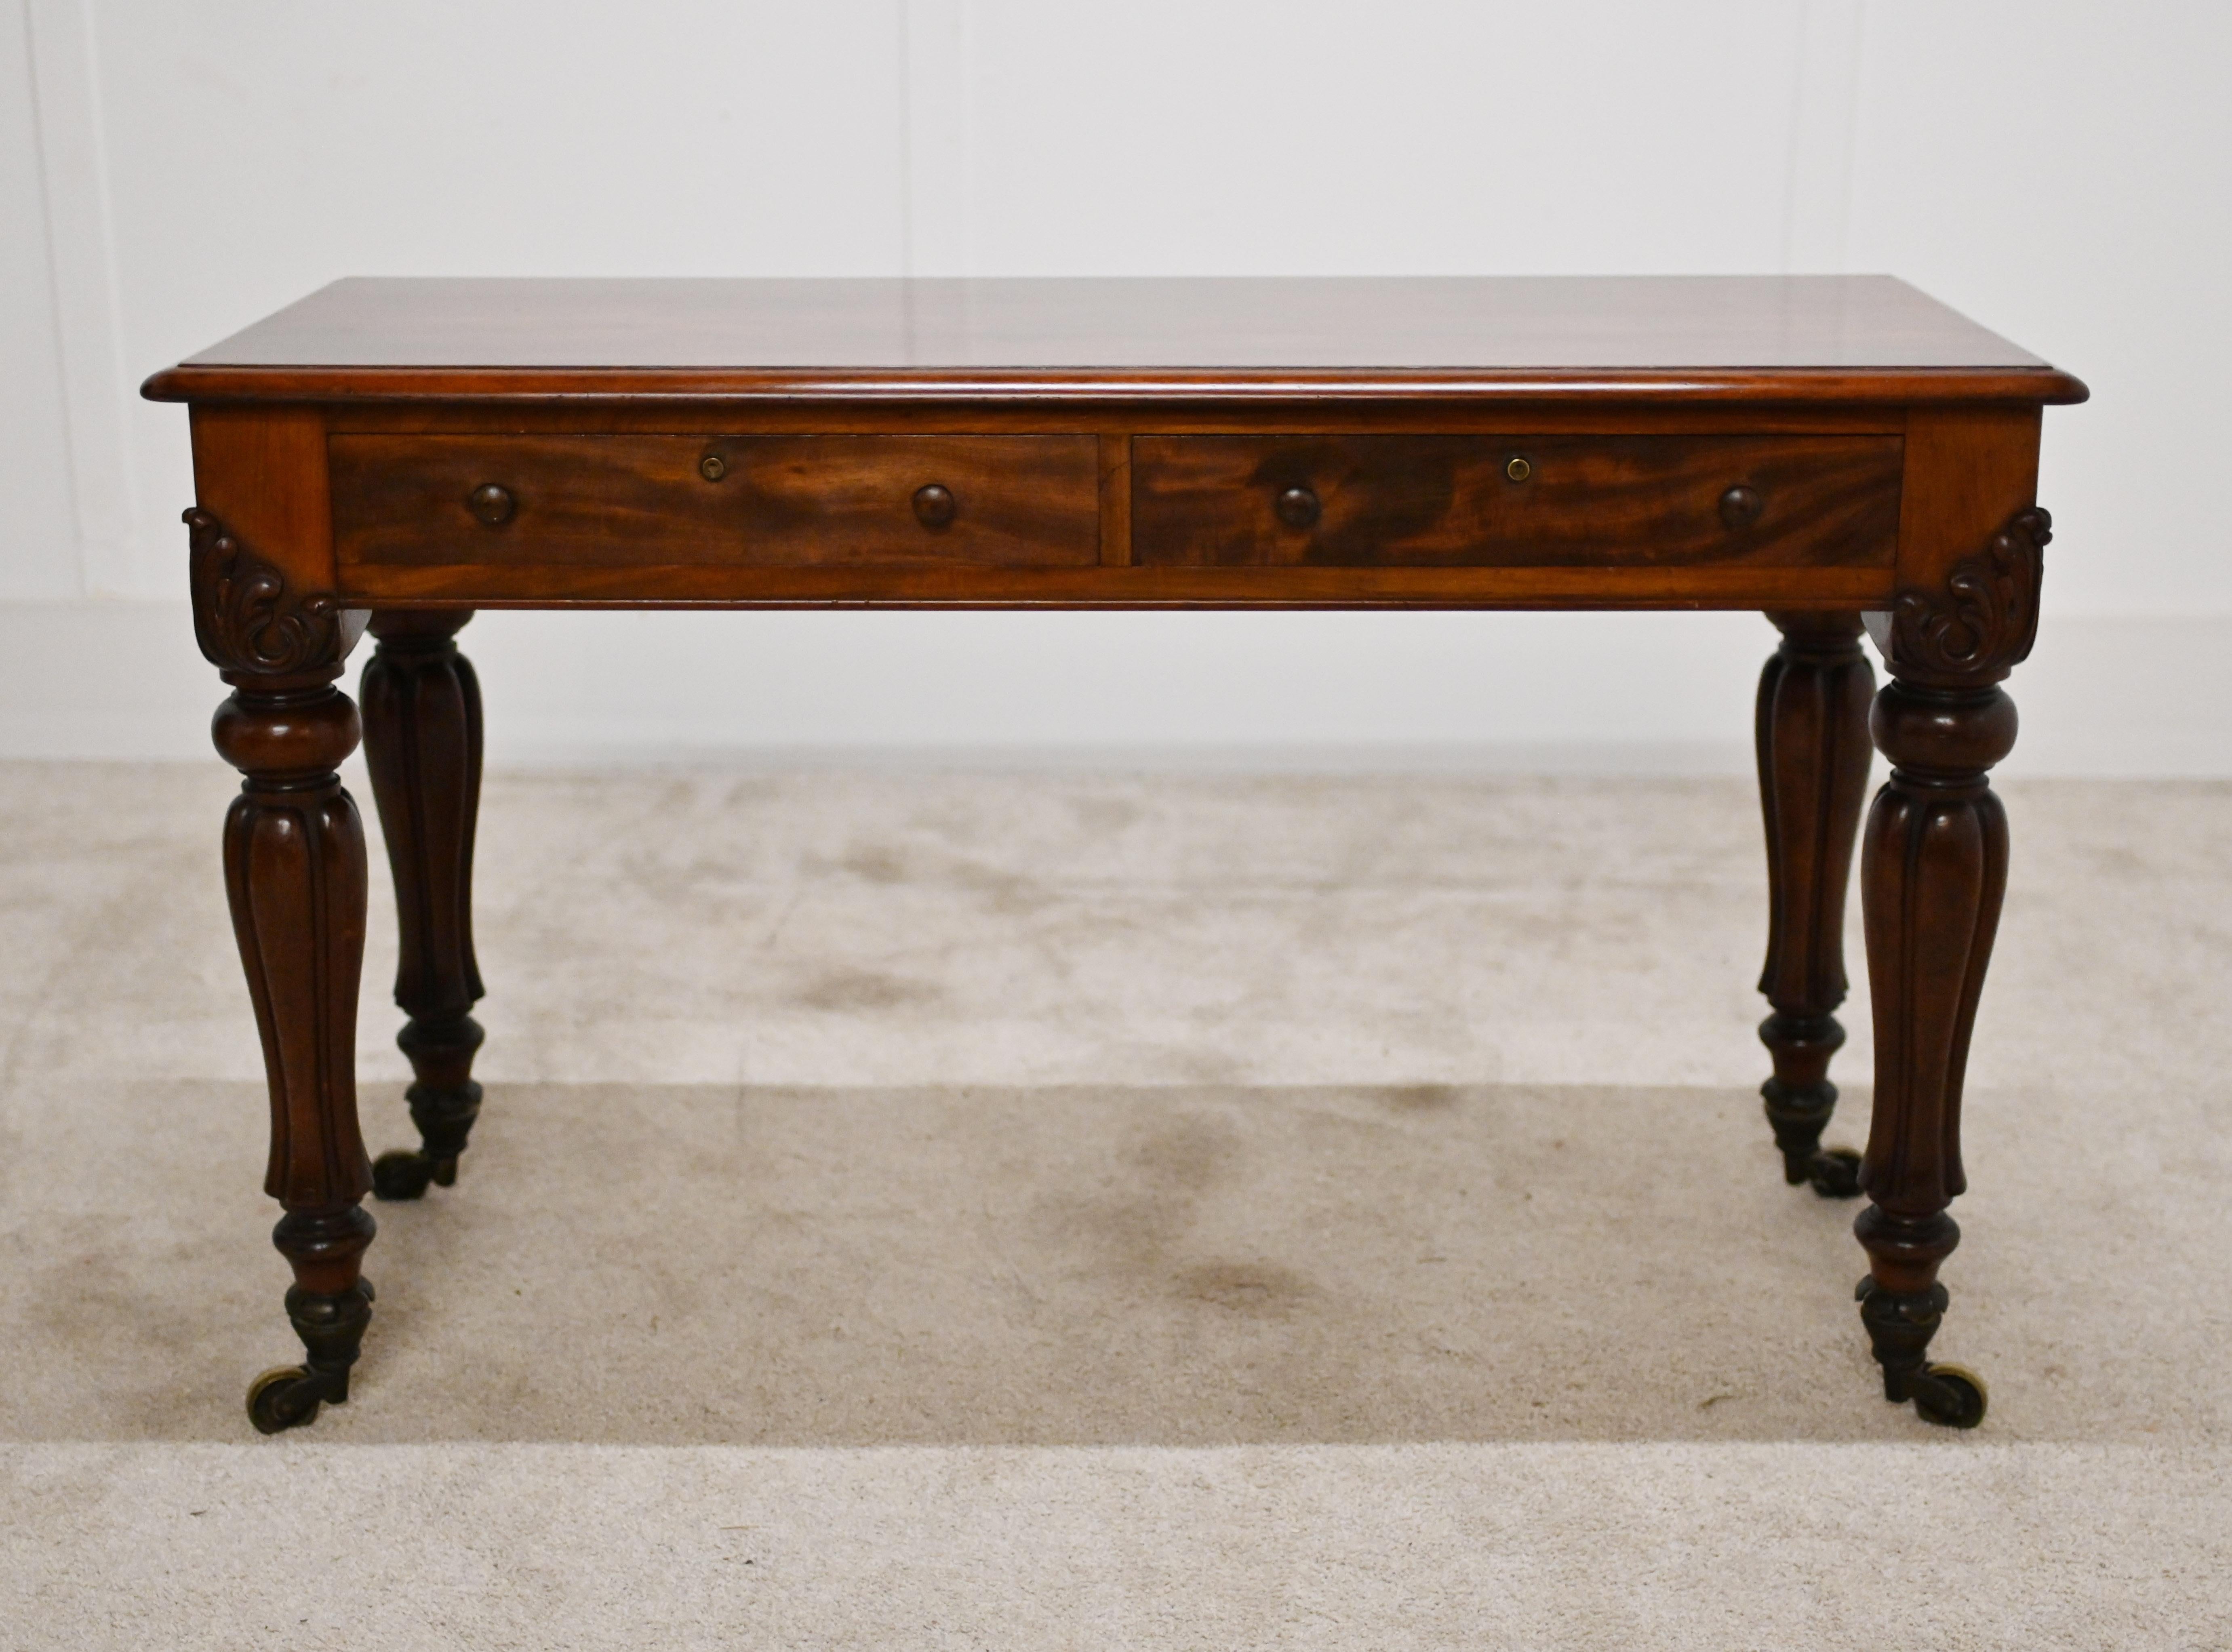 Mid-19th Century Victorian Mahogany Desk Hamptons and Sons London 1840 For Sale